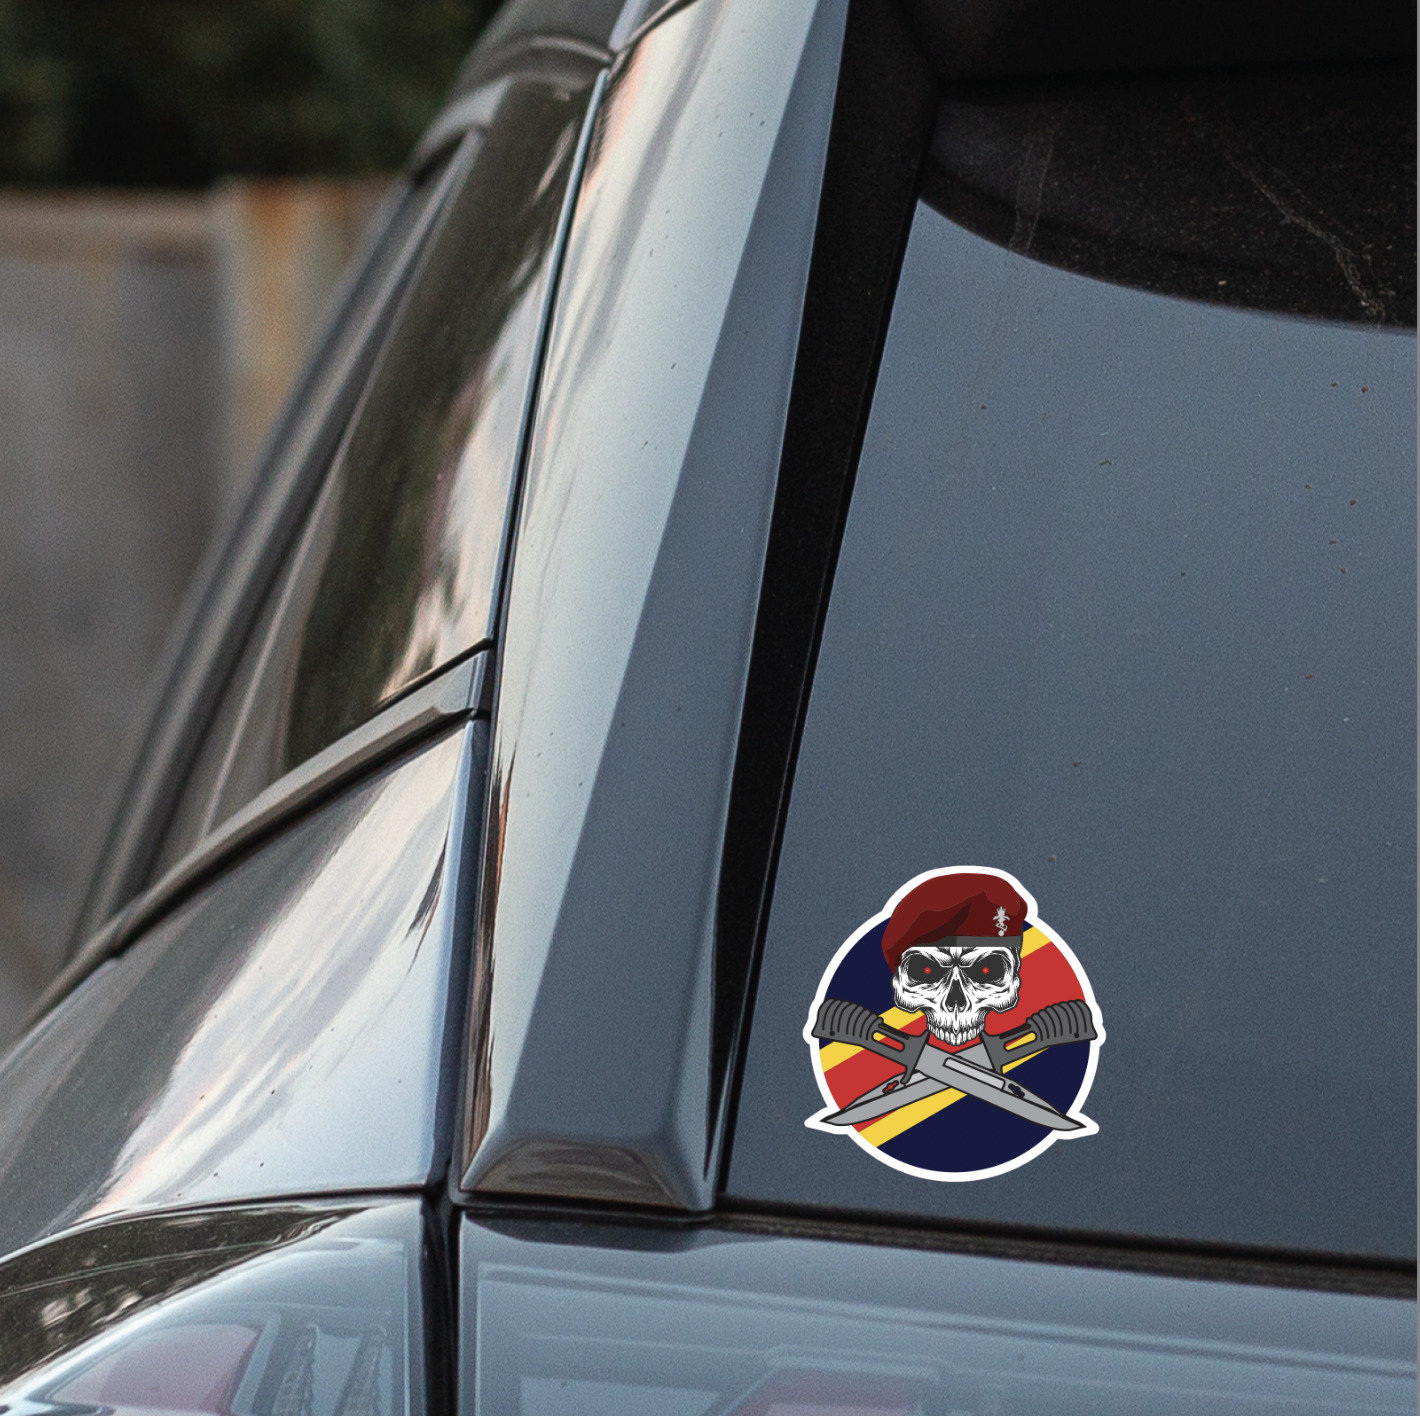 Airborne REME Car Decal - Stylish Skull and Crossed Bayonets Design - Picture 3 of 5